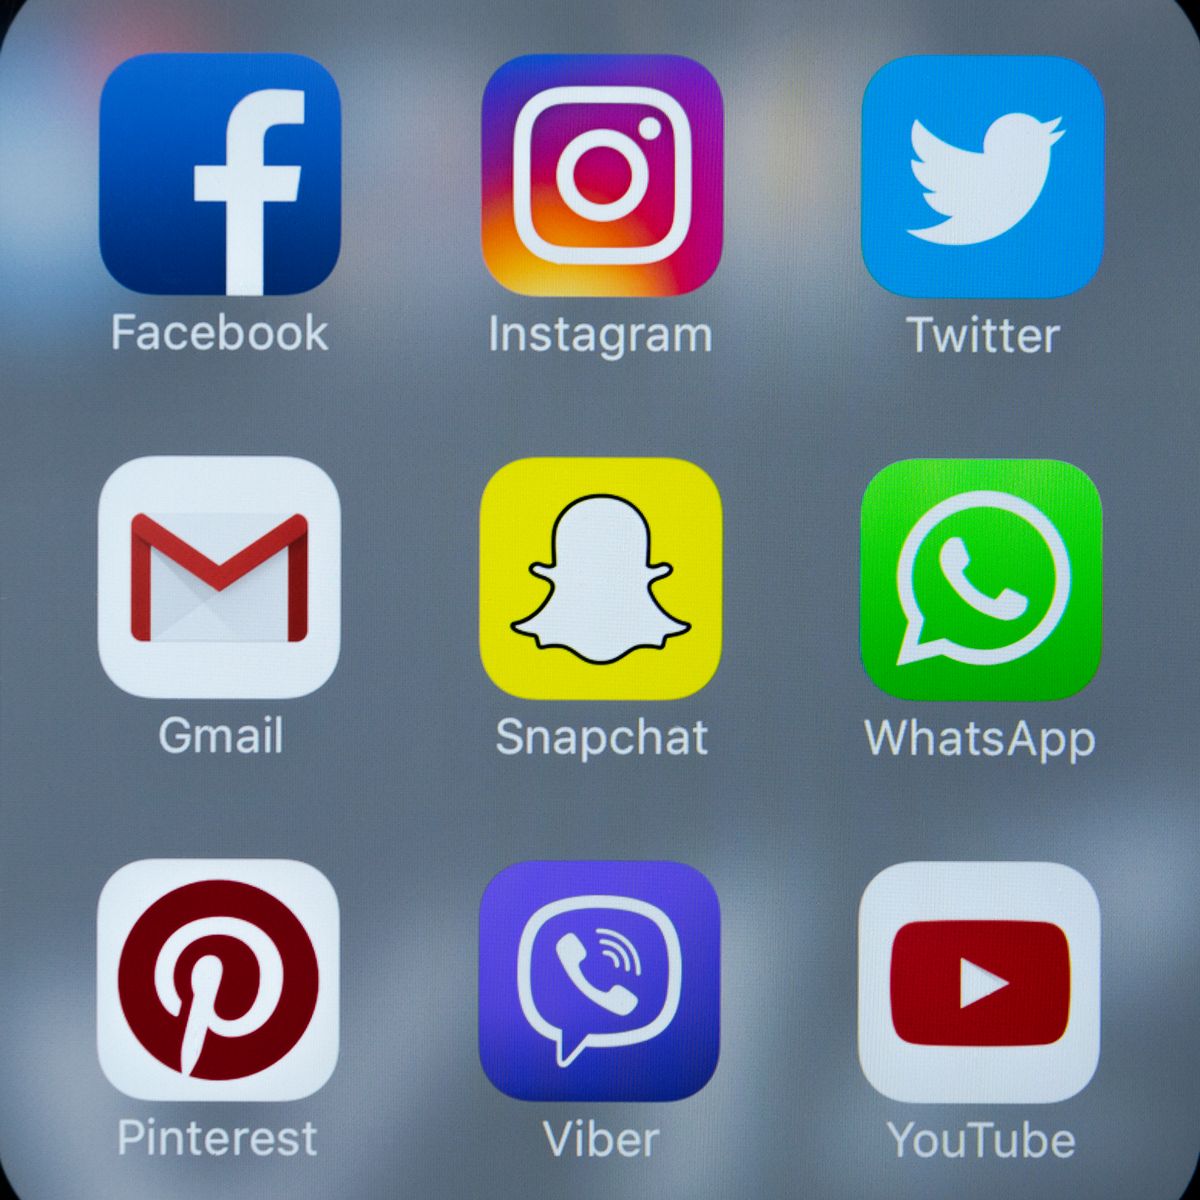 If you need Help recovering any Account, Mails, Tiktok, Snapchat, Instagram etc.
I'm available for assistance
#hacked #facebookdown #whatsapp #hackedinstagram #twitterdown #lockedaccount #metamask #ransomware #alterworld
#hacked